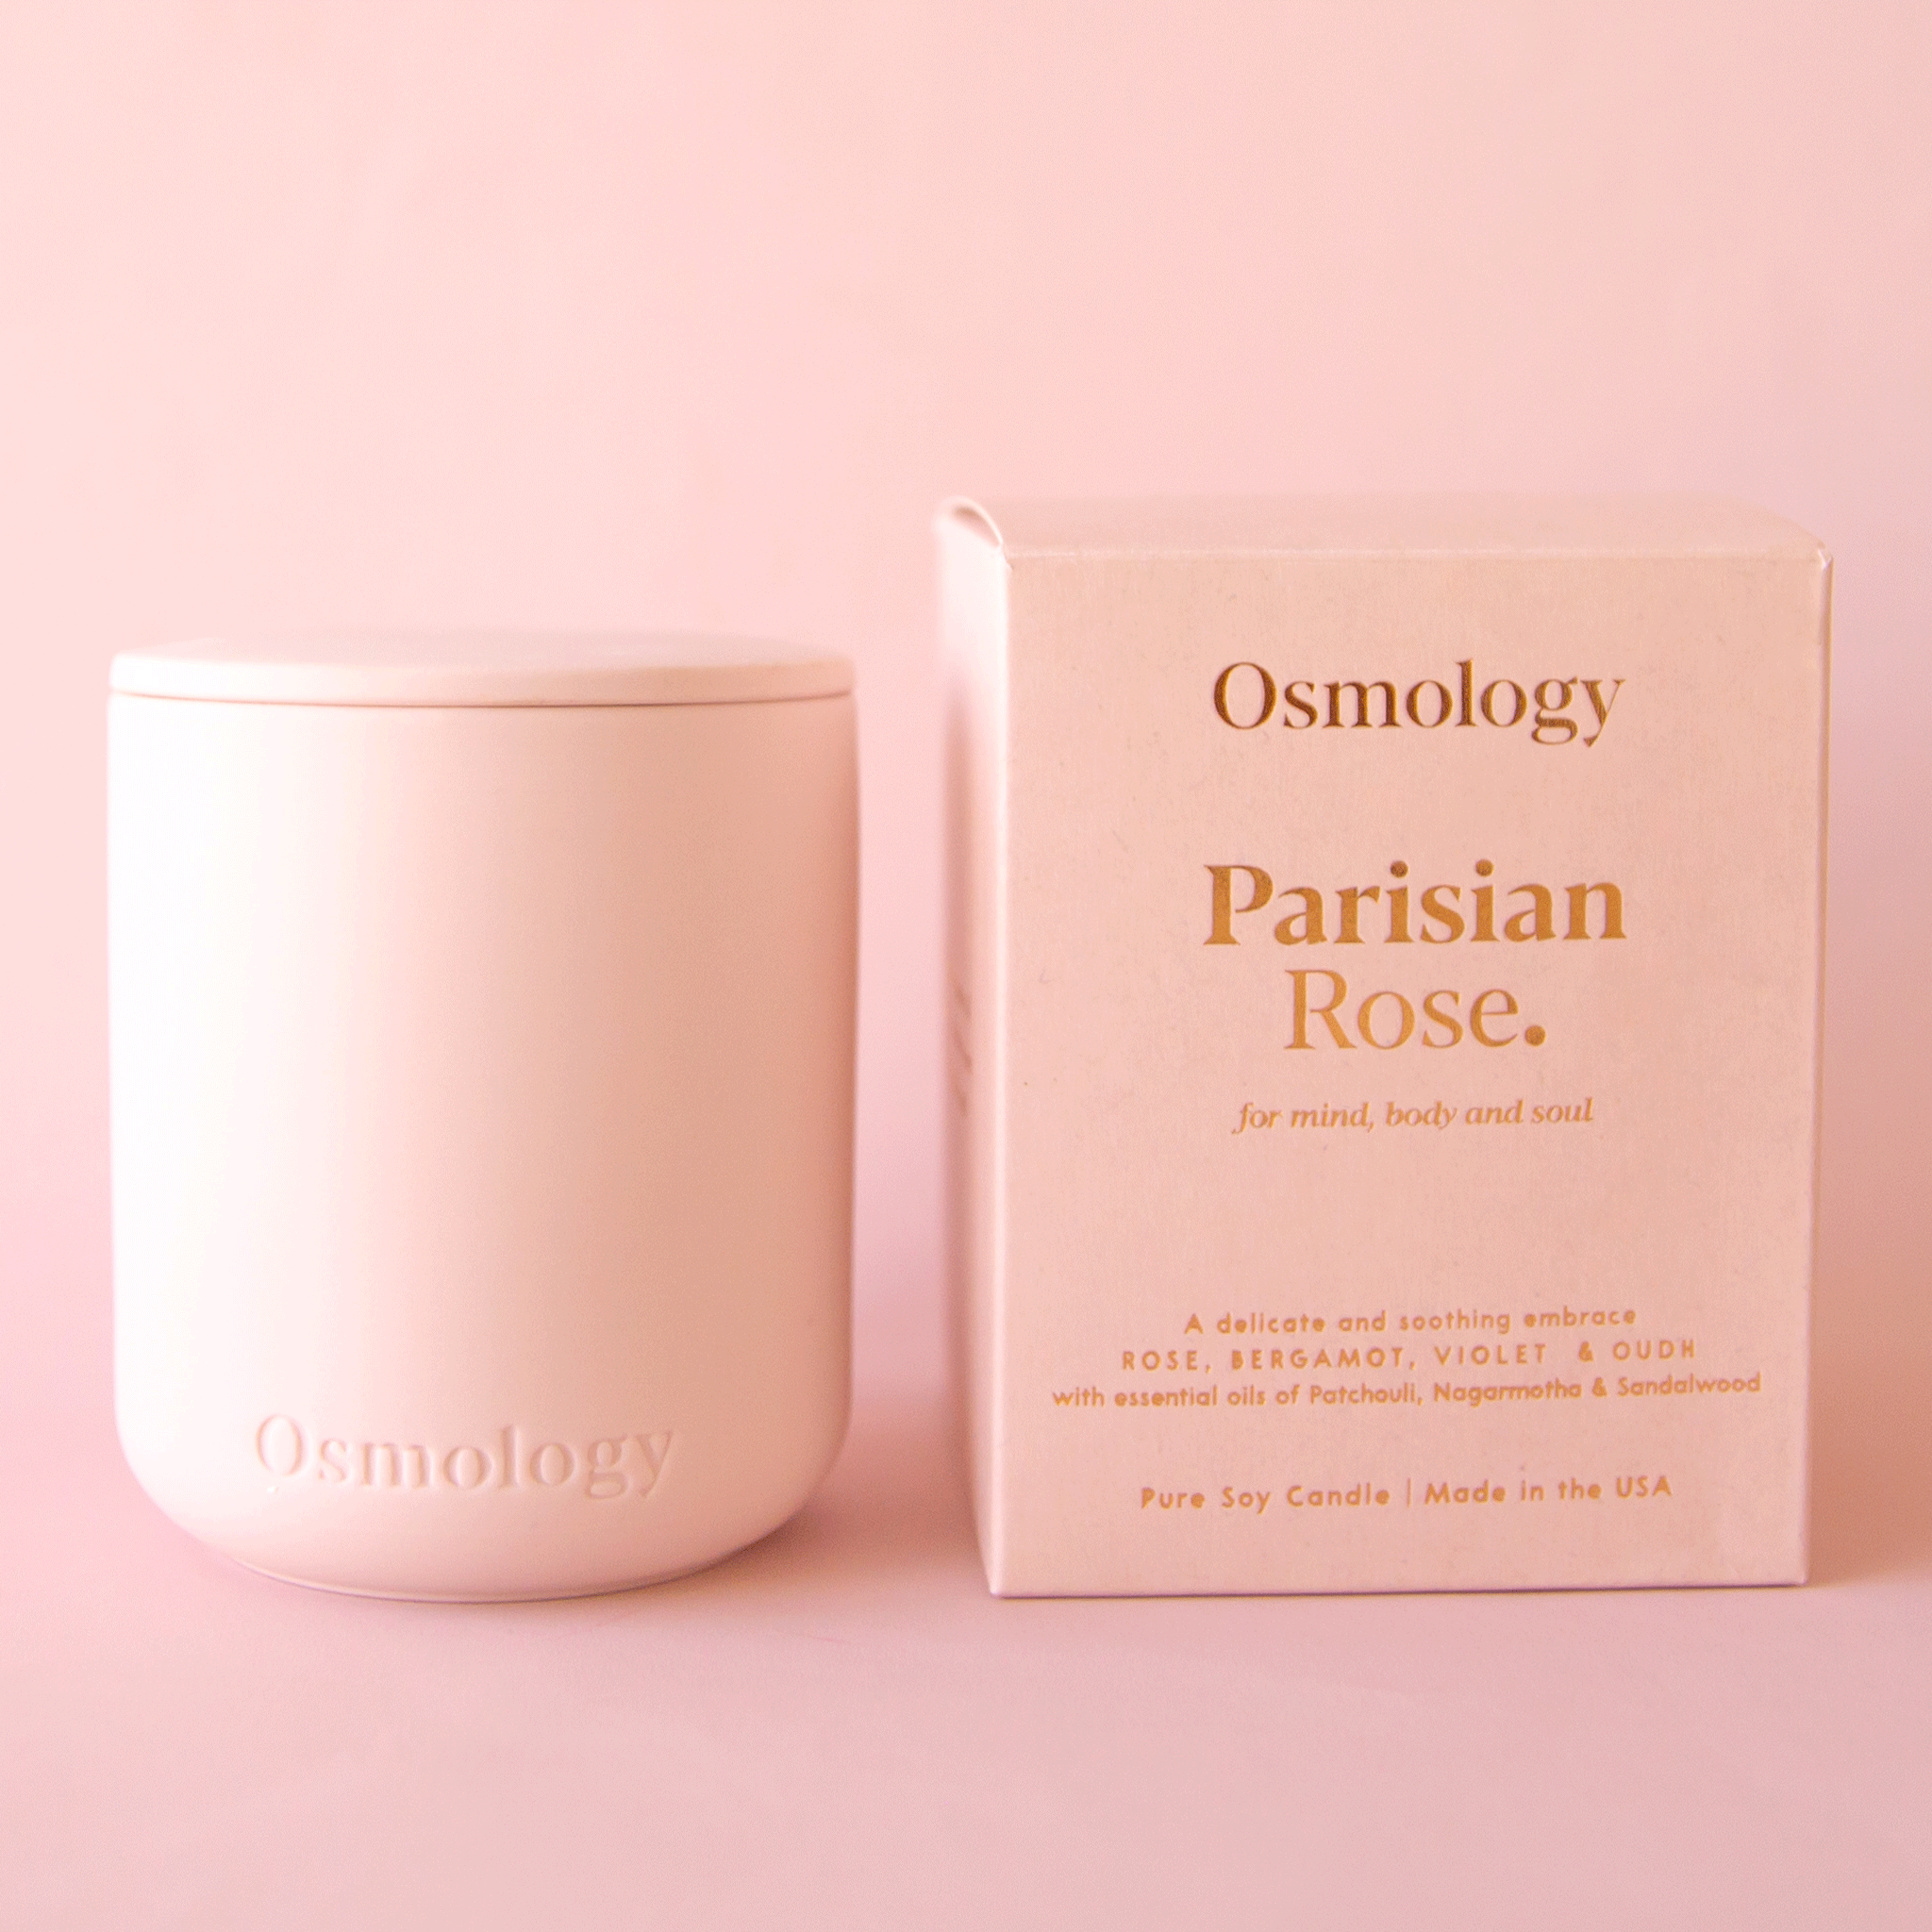 On a pink background is a pink clay jarred candle with a lid and the box that it comes in on the side that reads, "Parisian Rose for mind body and soul.".